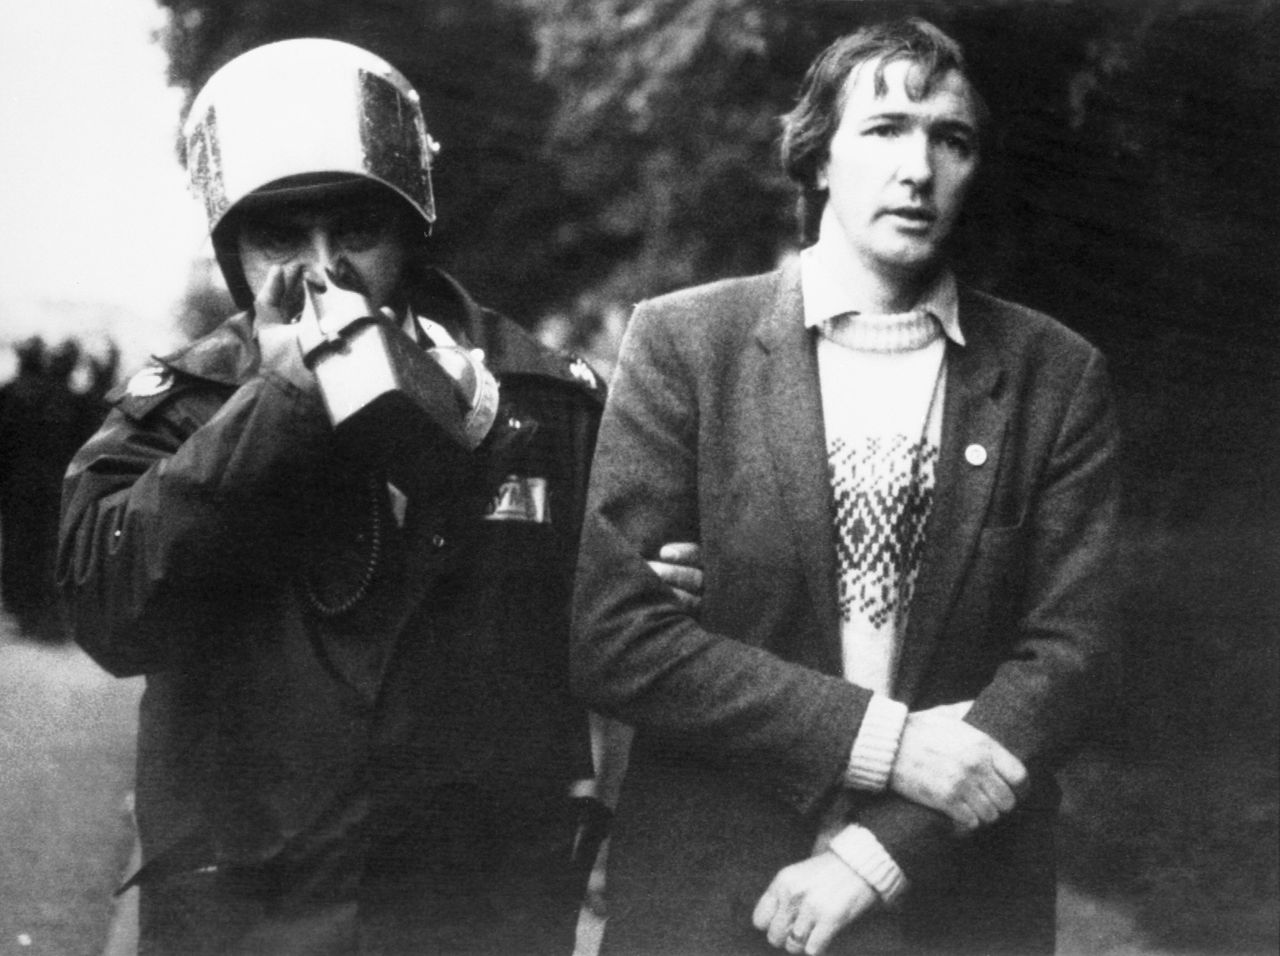 Former Rother Valley Labour MP Kevin Barron taking part in a miners' strike in 1984